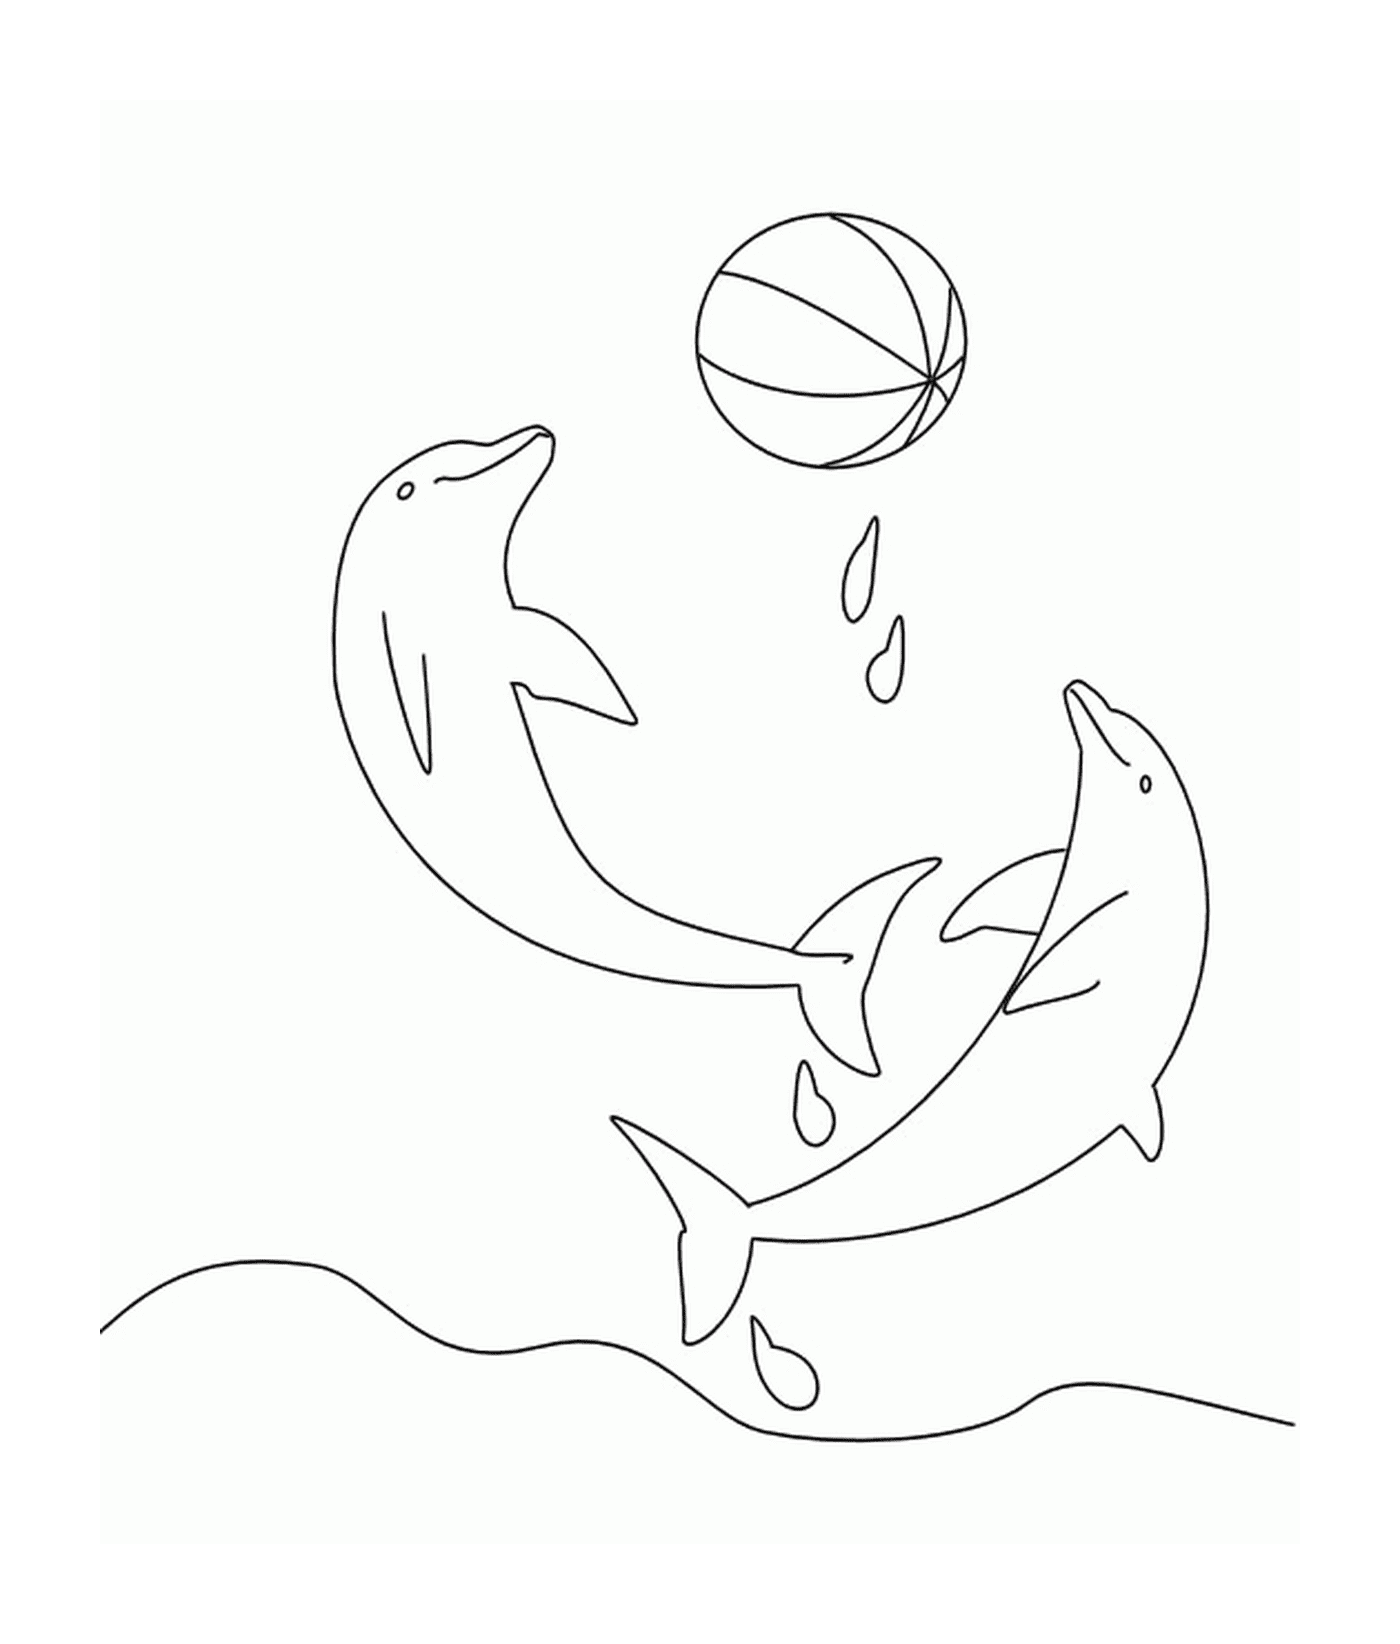  Two dolphins playing with a Balloon 